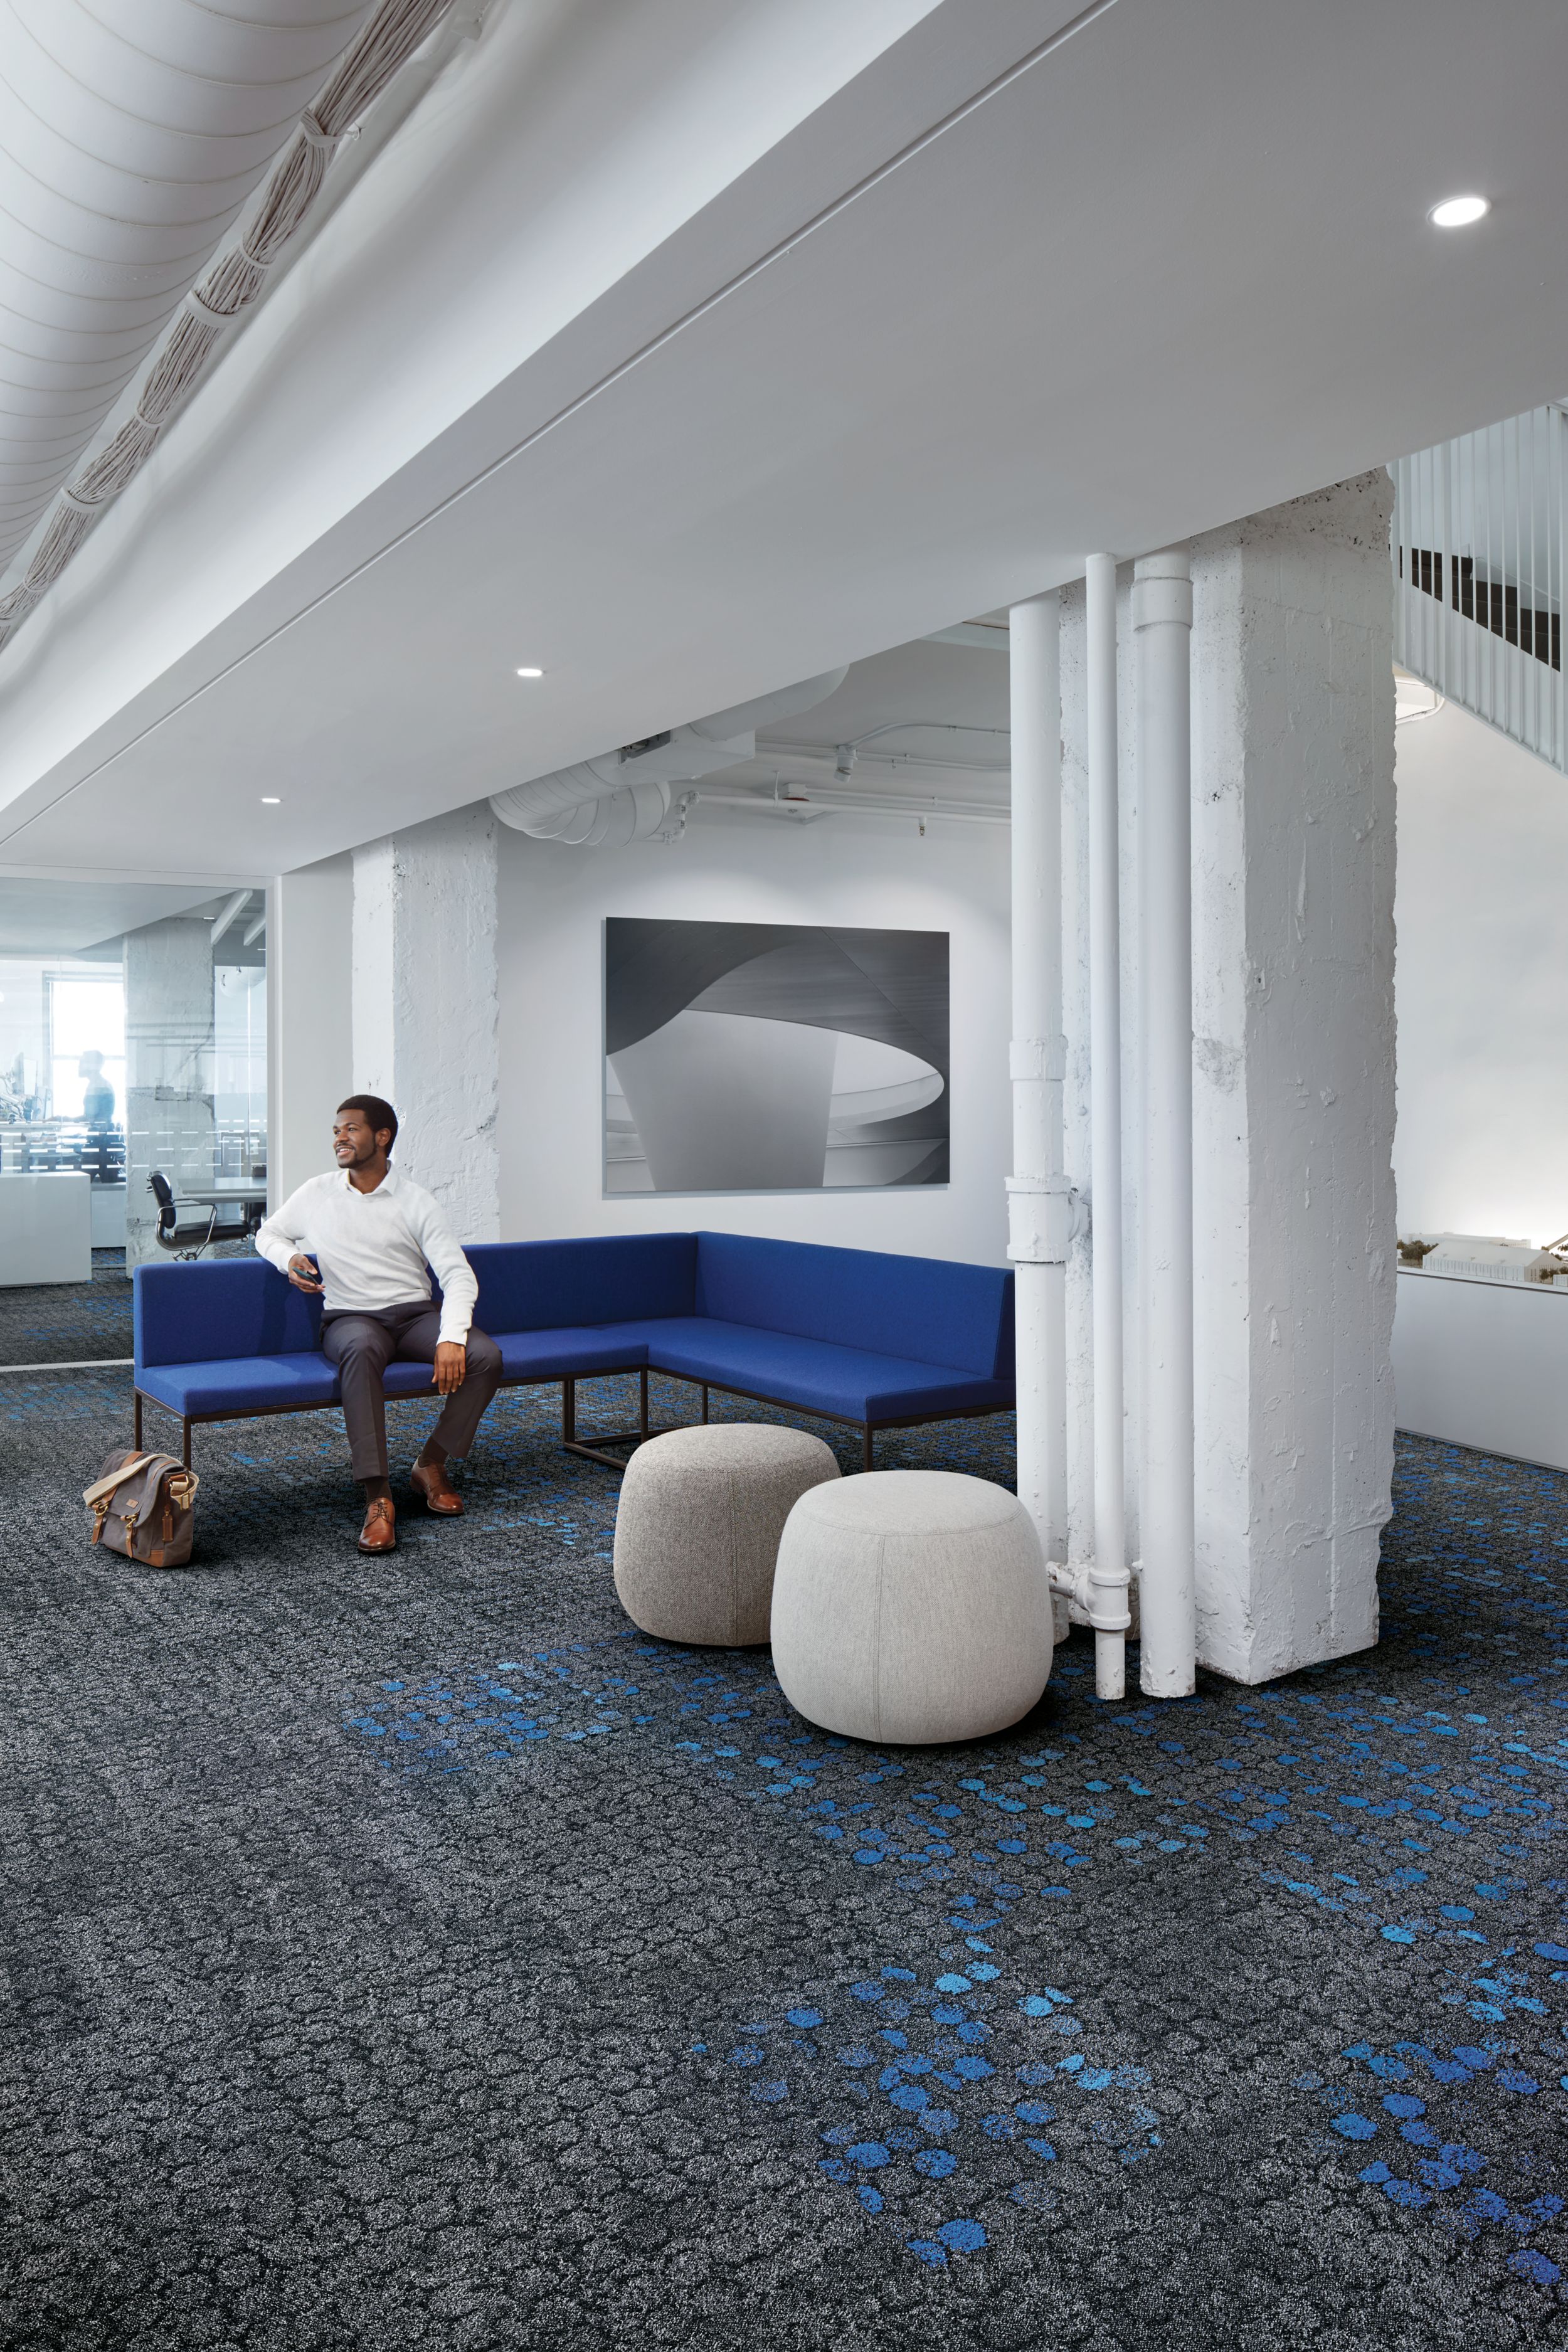 Interface Broome Street and Mercer Street carpet tile in lobby with man seated on blue couch número de imagen 11